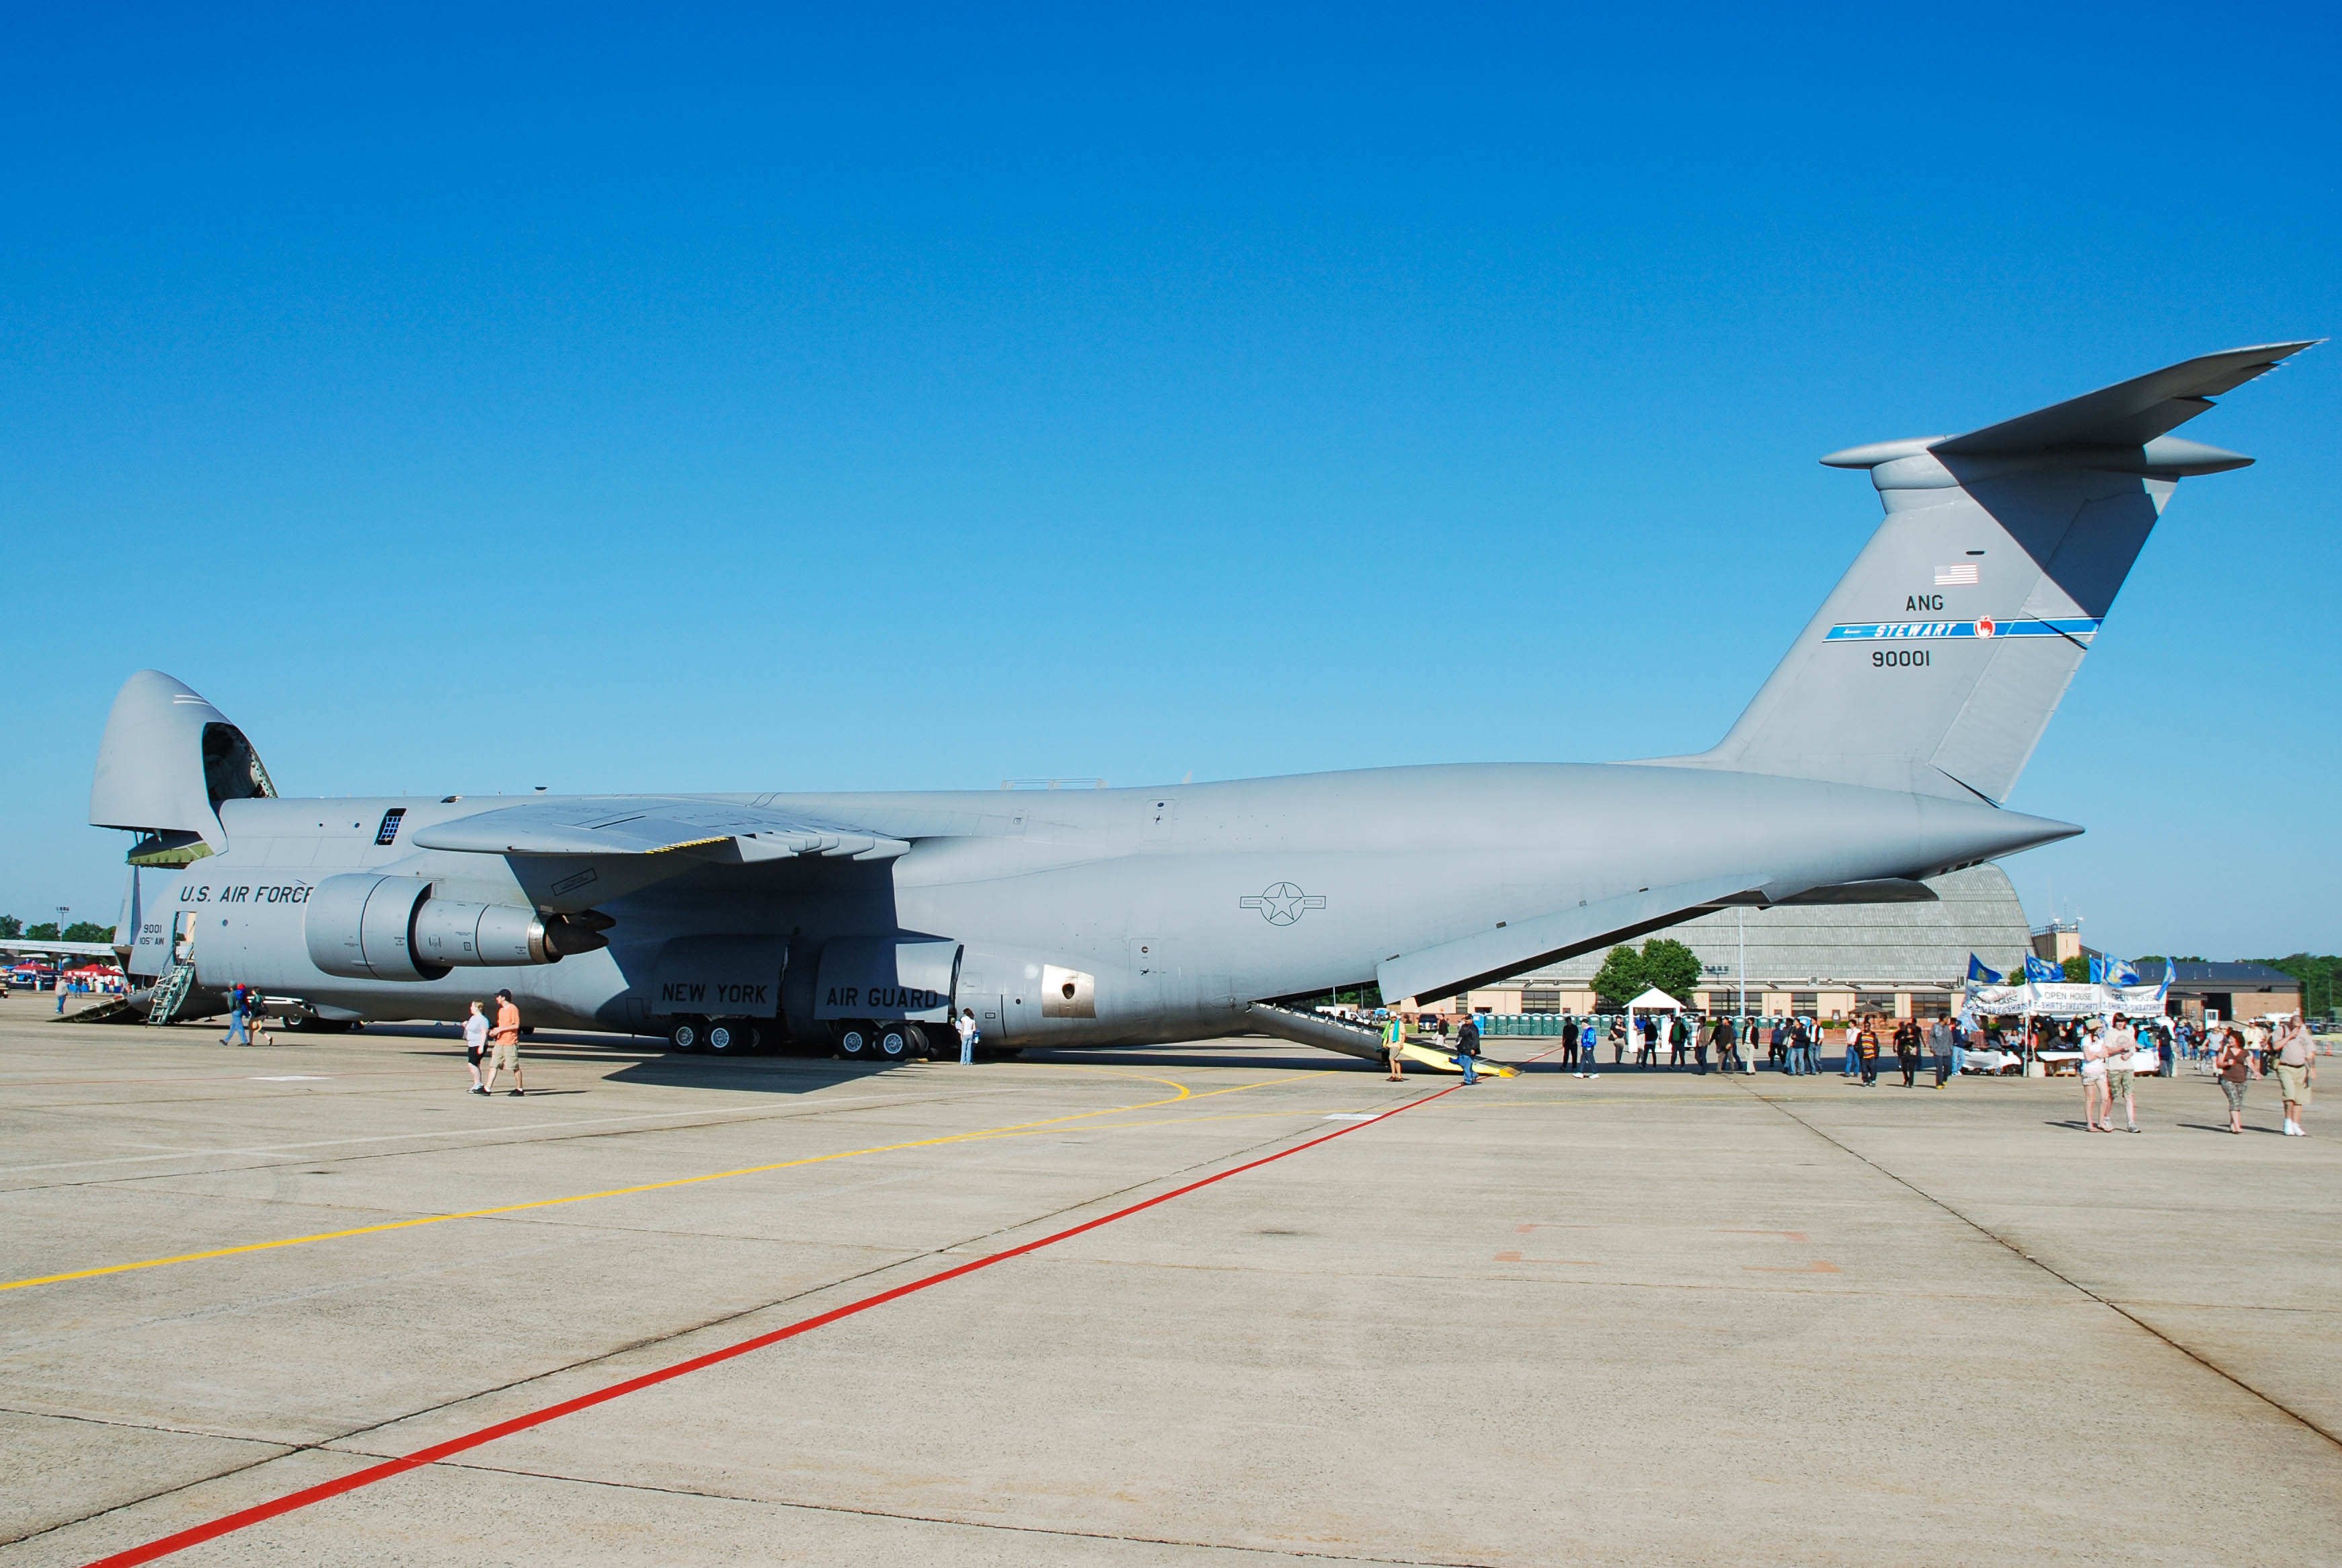 69-0001/690001 USAF - United States Air Force Lockheed C-5A Galaxy Photo by colinw - AVSpotters.com